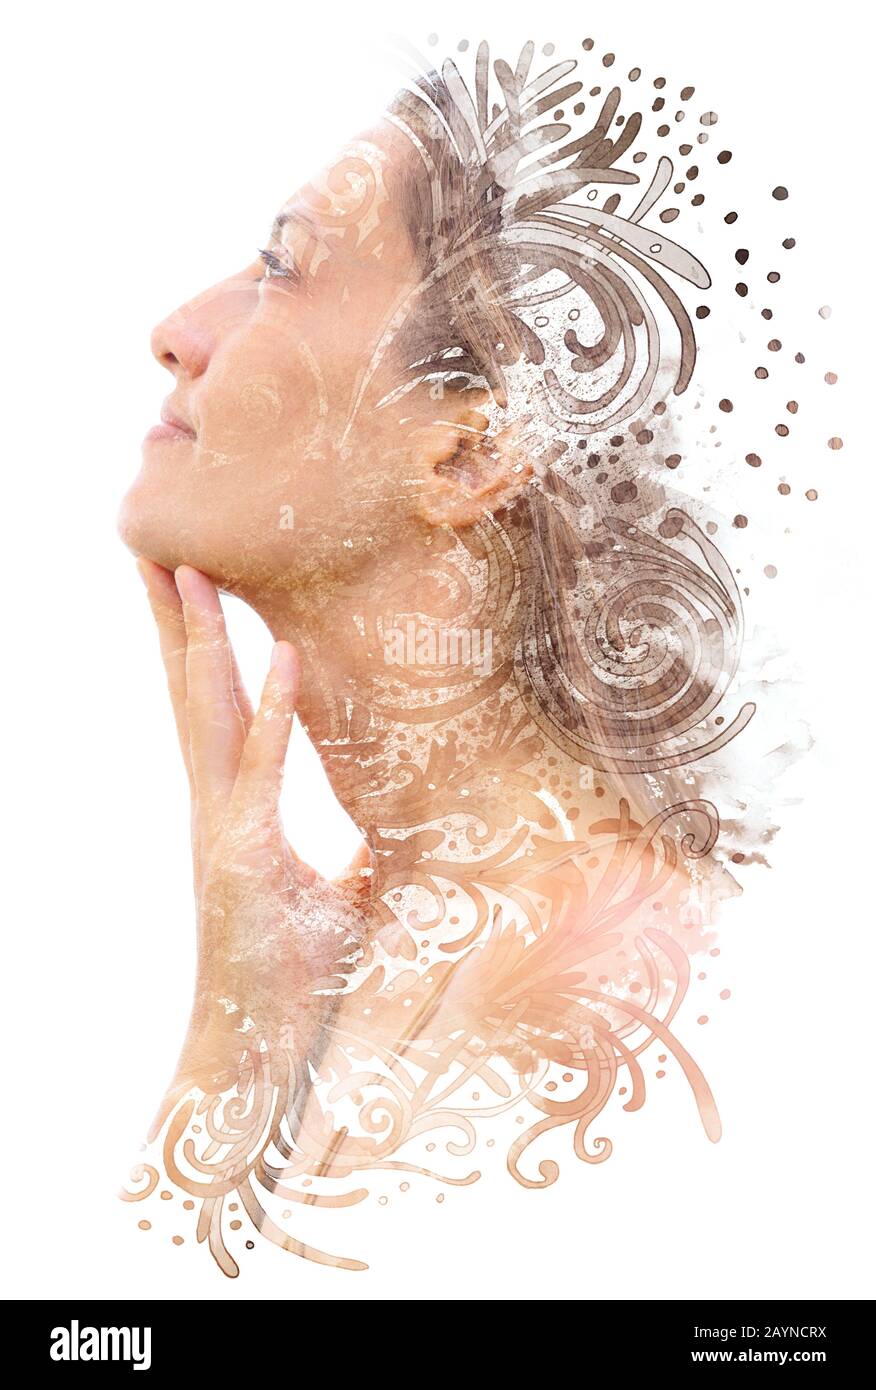 Paintography. A portrait combined with an illustration Stock Photo